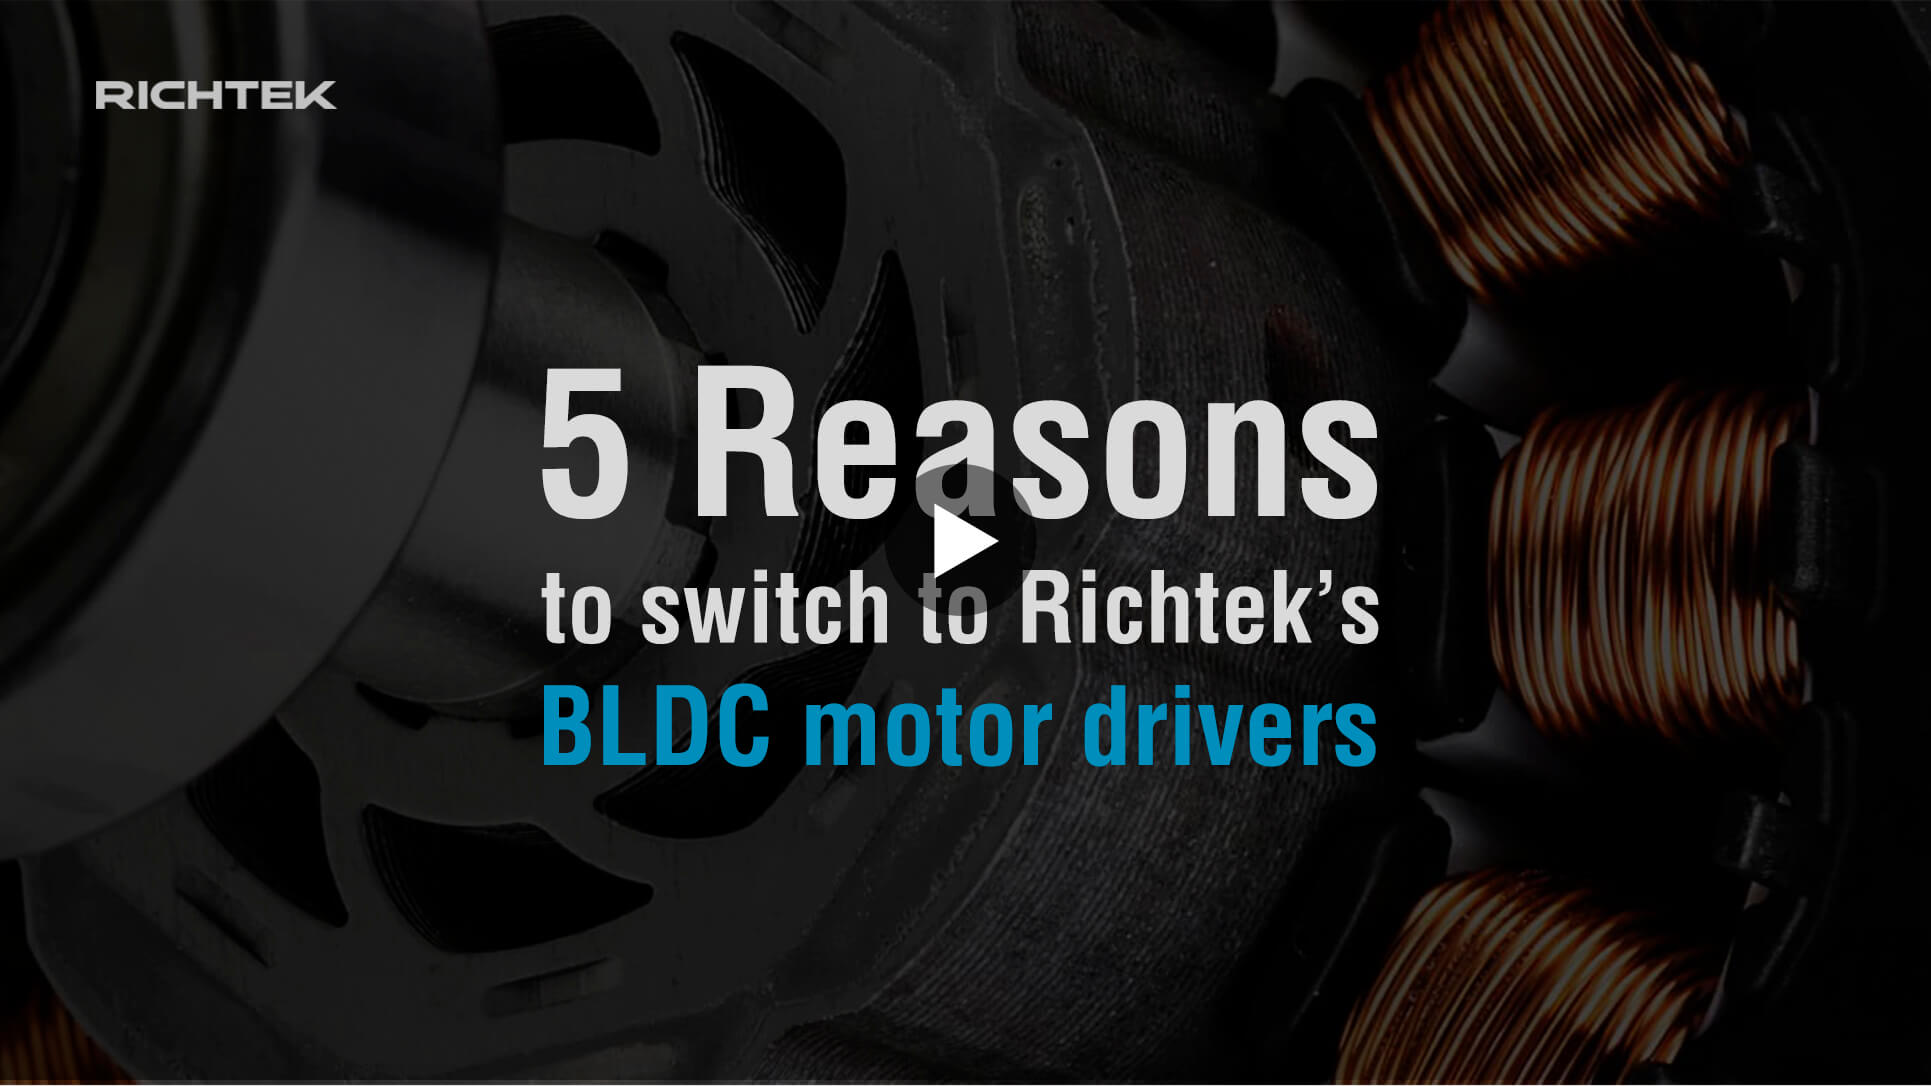 5 reasons to switch to Richtek’s BLDC motor drivers